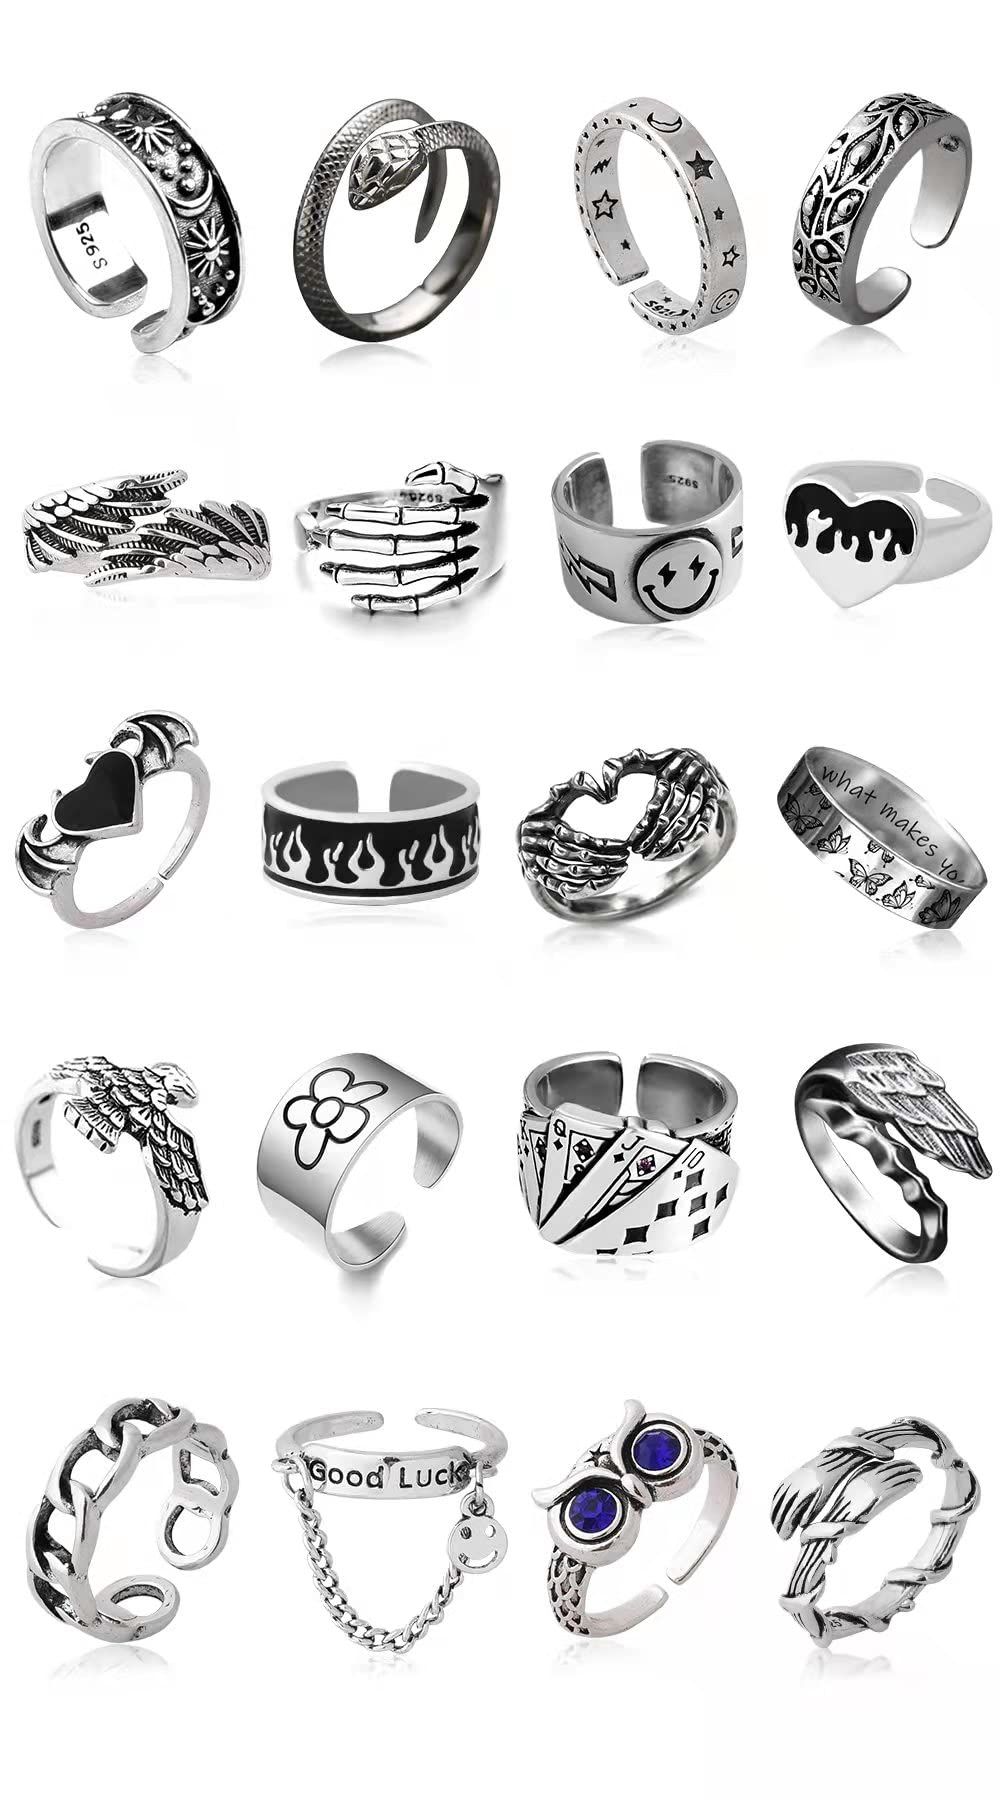 20 Pcs Silver Plated Rings Set, Cute Open Rings Pack, Vintage Goth Y2k Adjustable Rings, Cute and Cool, Flame, Snake, Hug, Smiley Face, Moon and Sun Rings for Couples, Gift for Women Men Girls